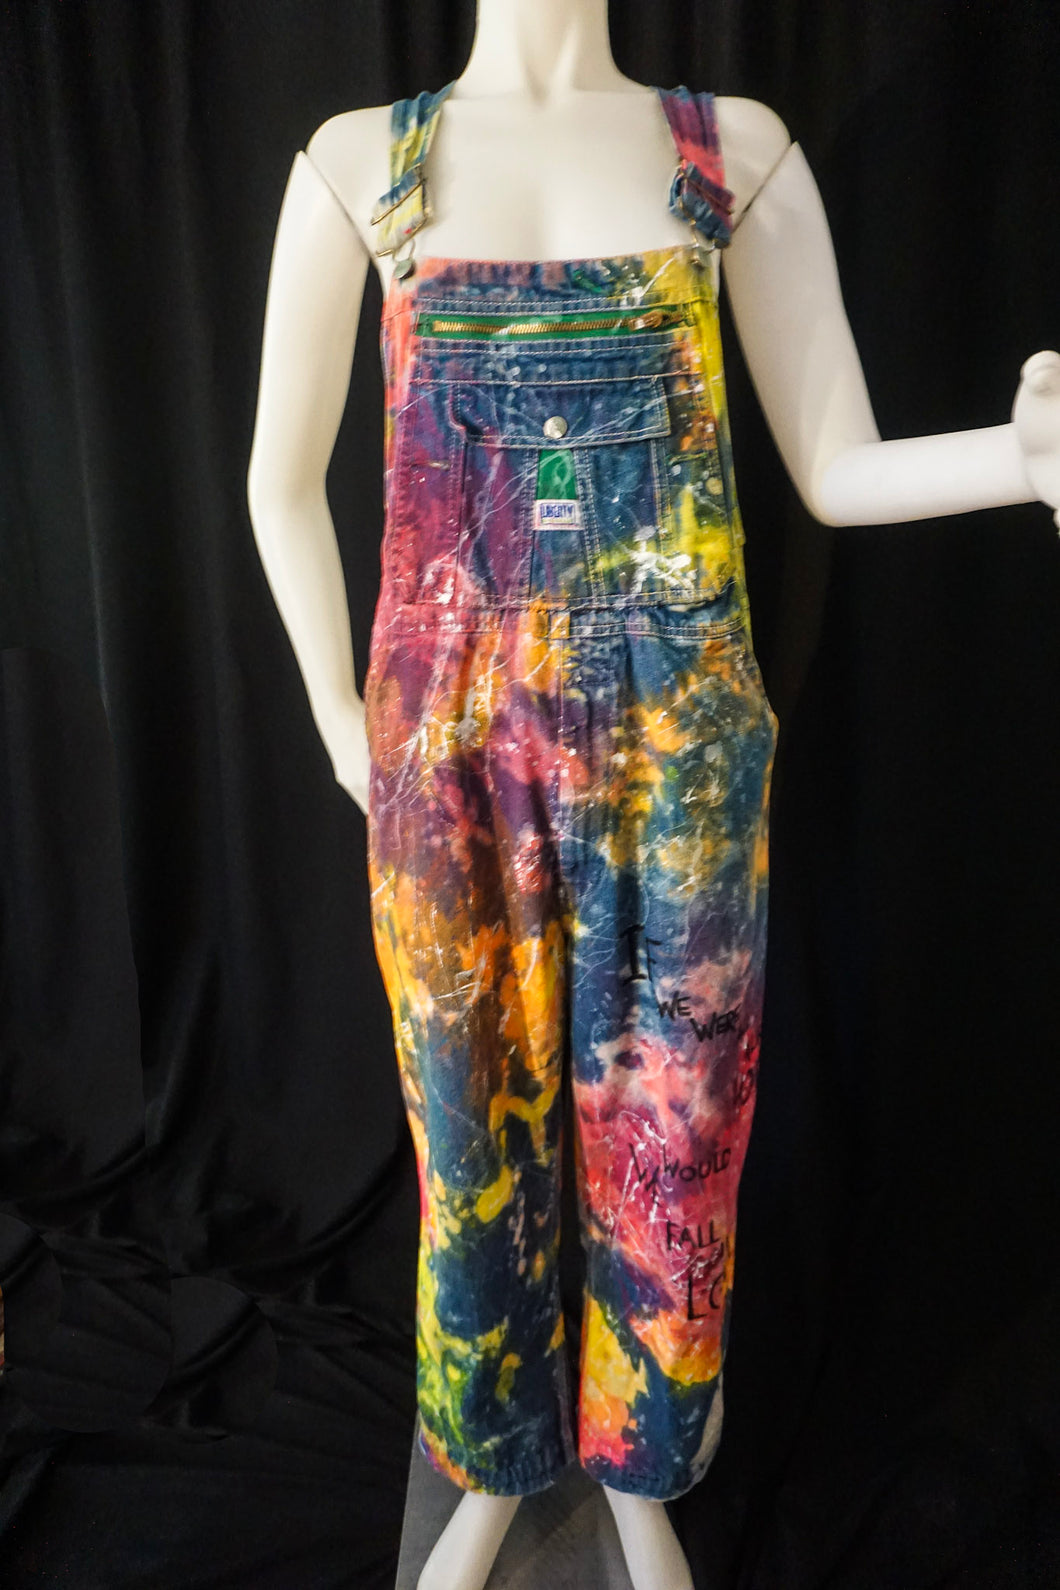 A Cosmic Neon Daydream - Handpainted and Distressed Liberty Overalls by Nicole Young, Size Adult S/M